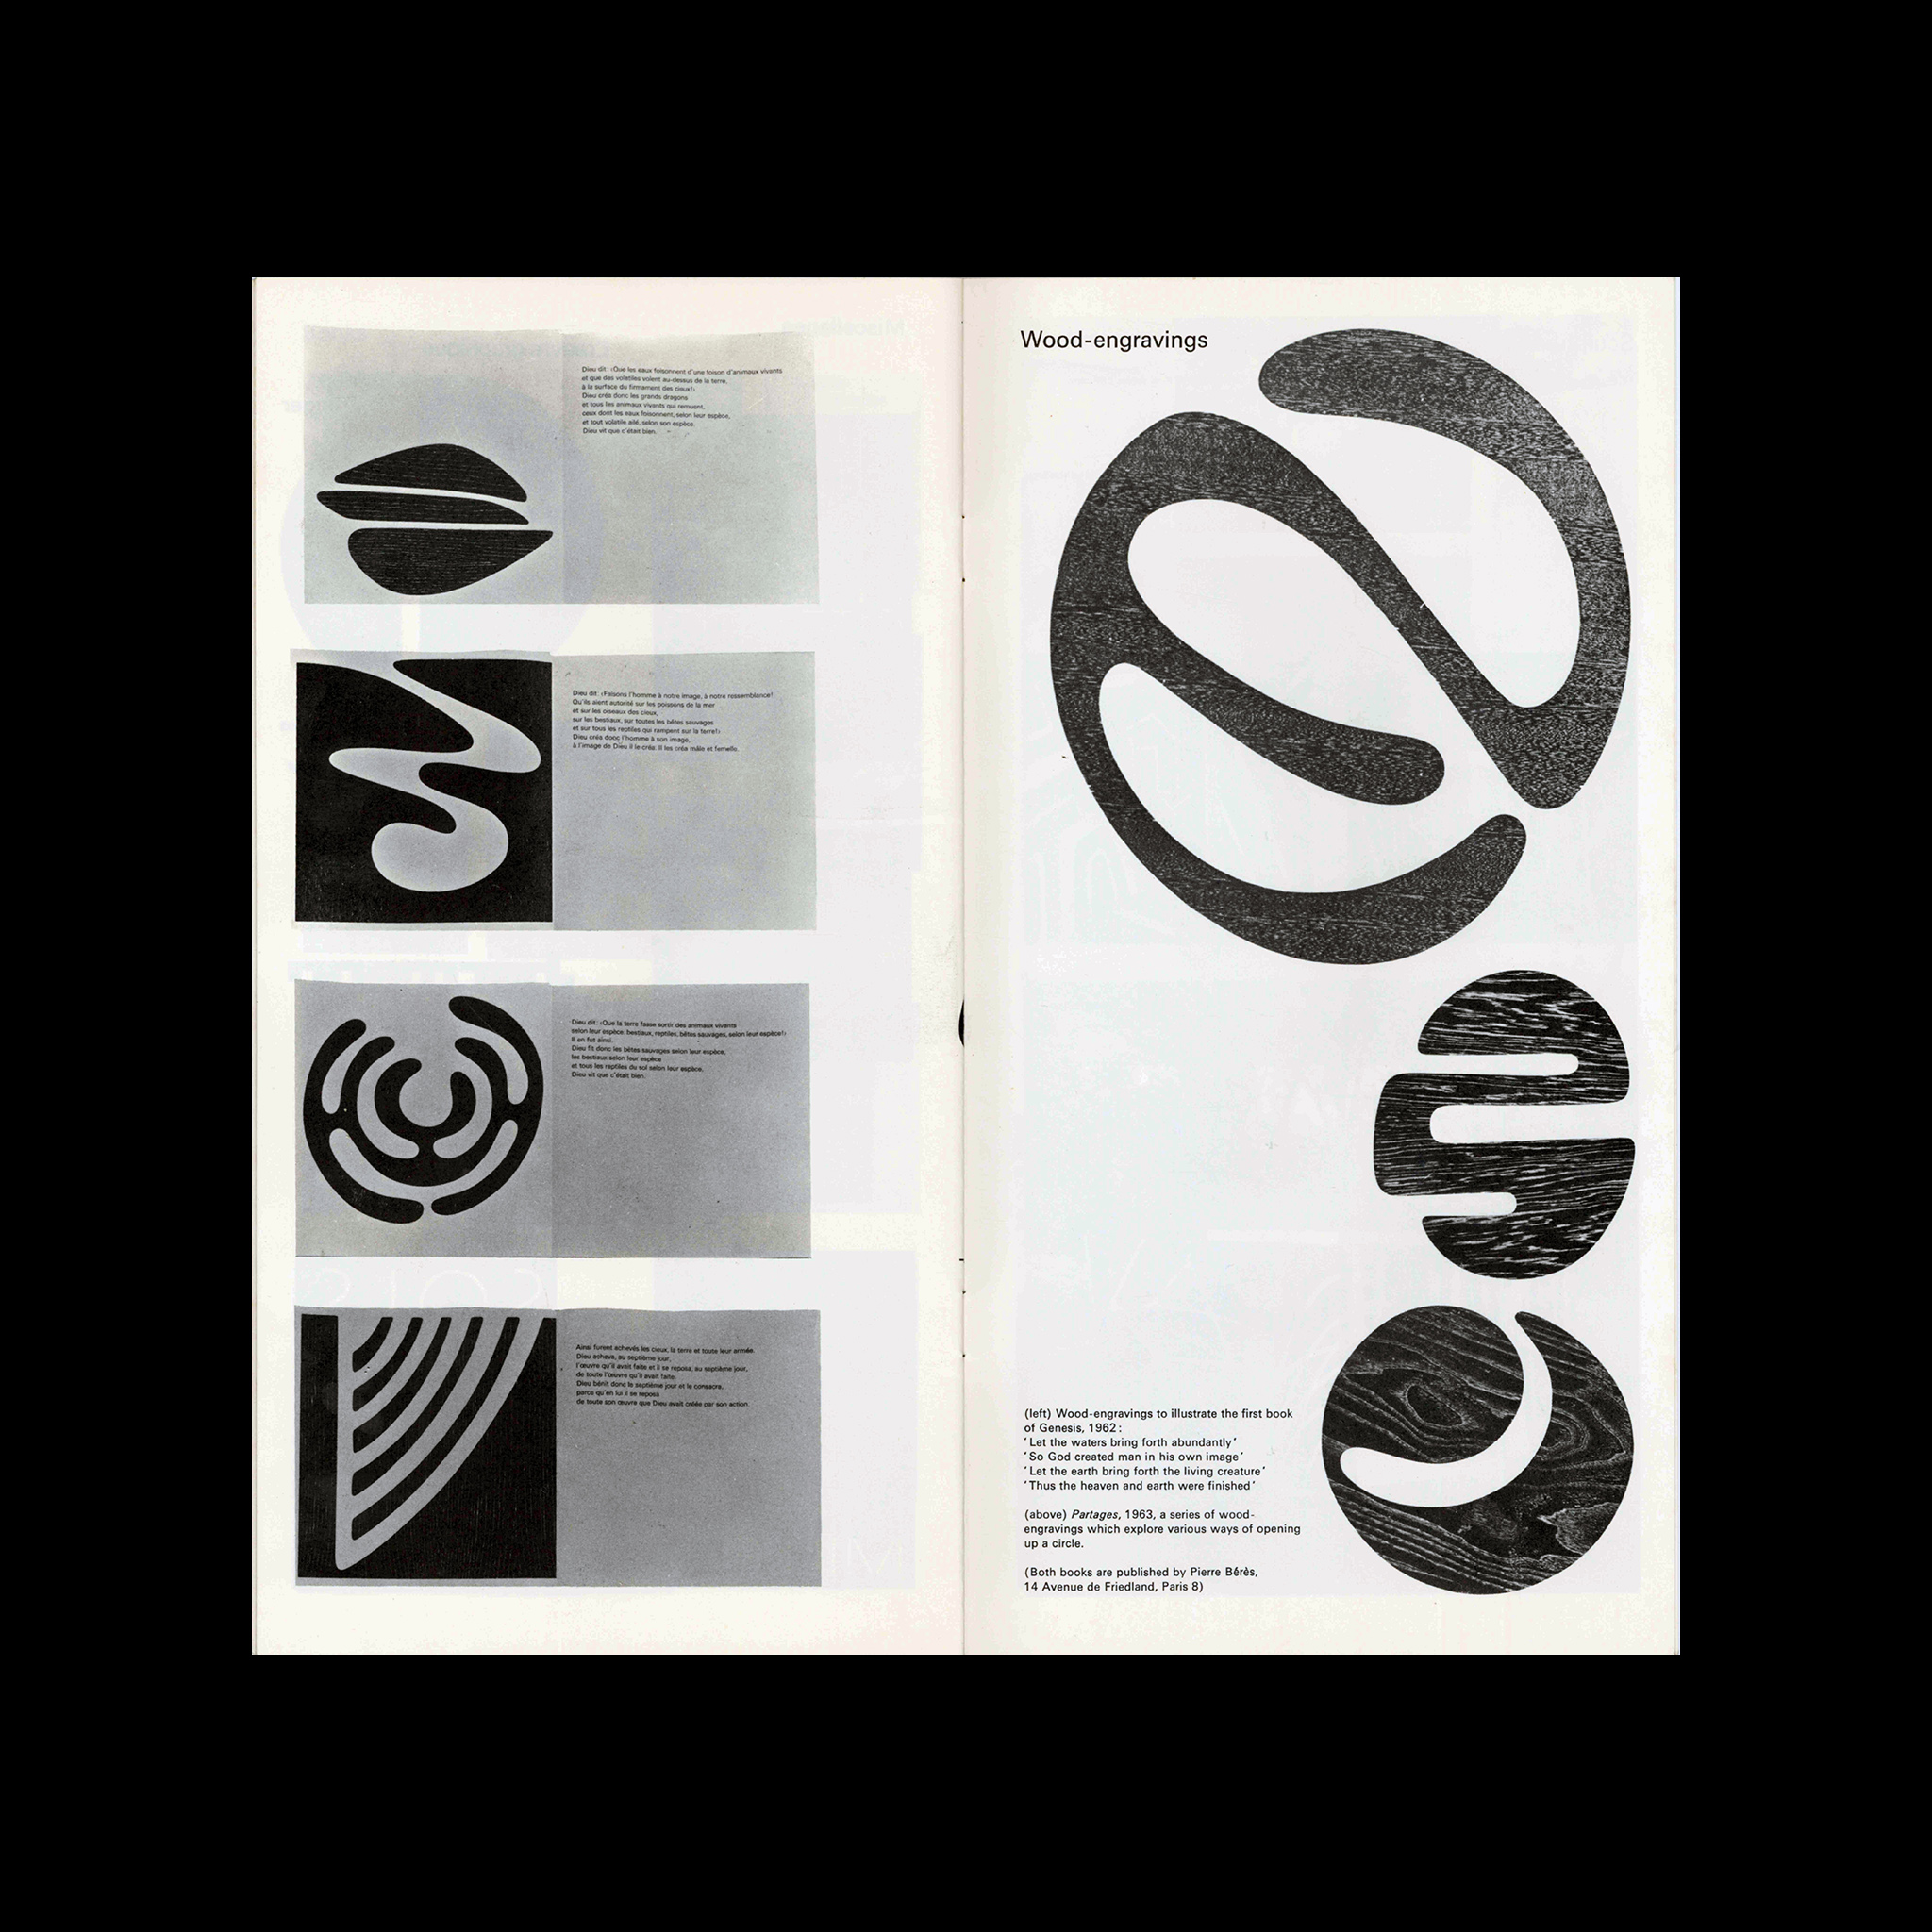 Graphismes by Frutiger, Monotype House, 1964